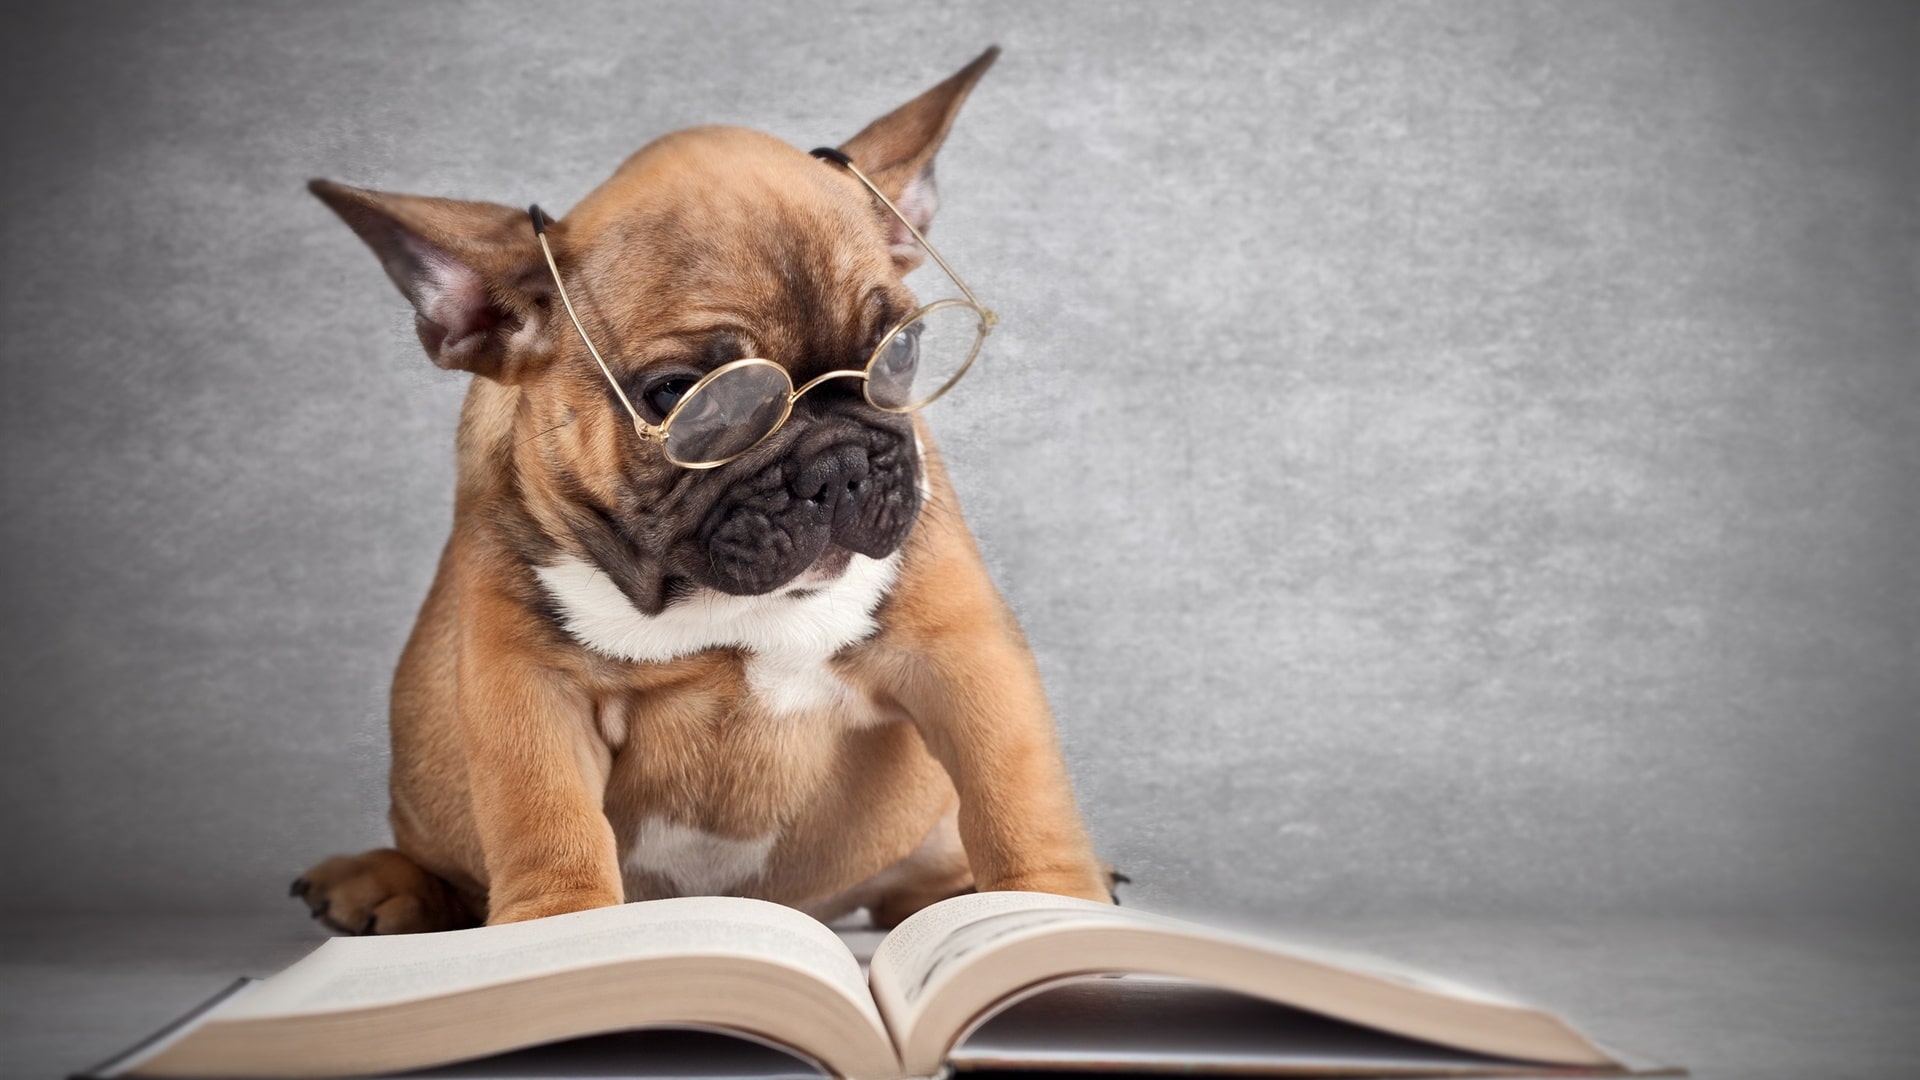 6787062-dog-with-glasses-wallpaper